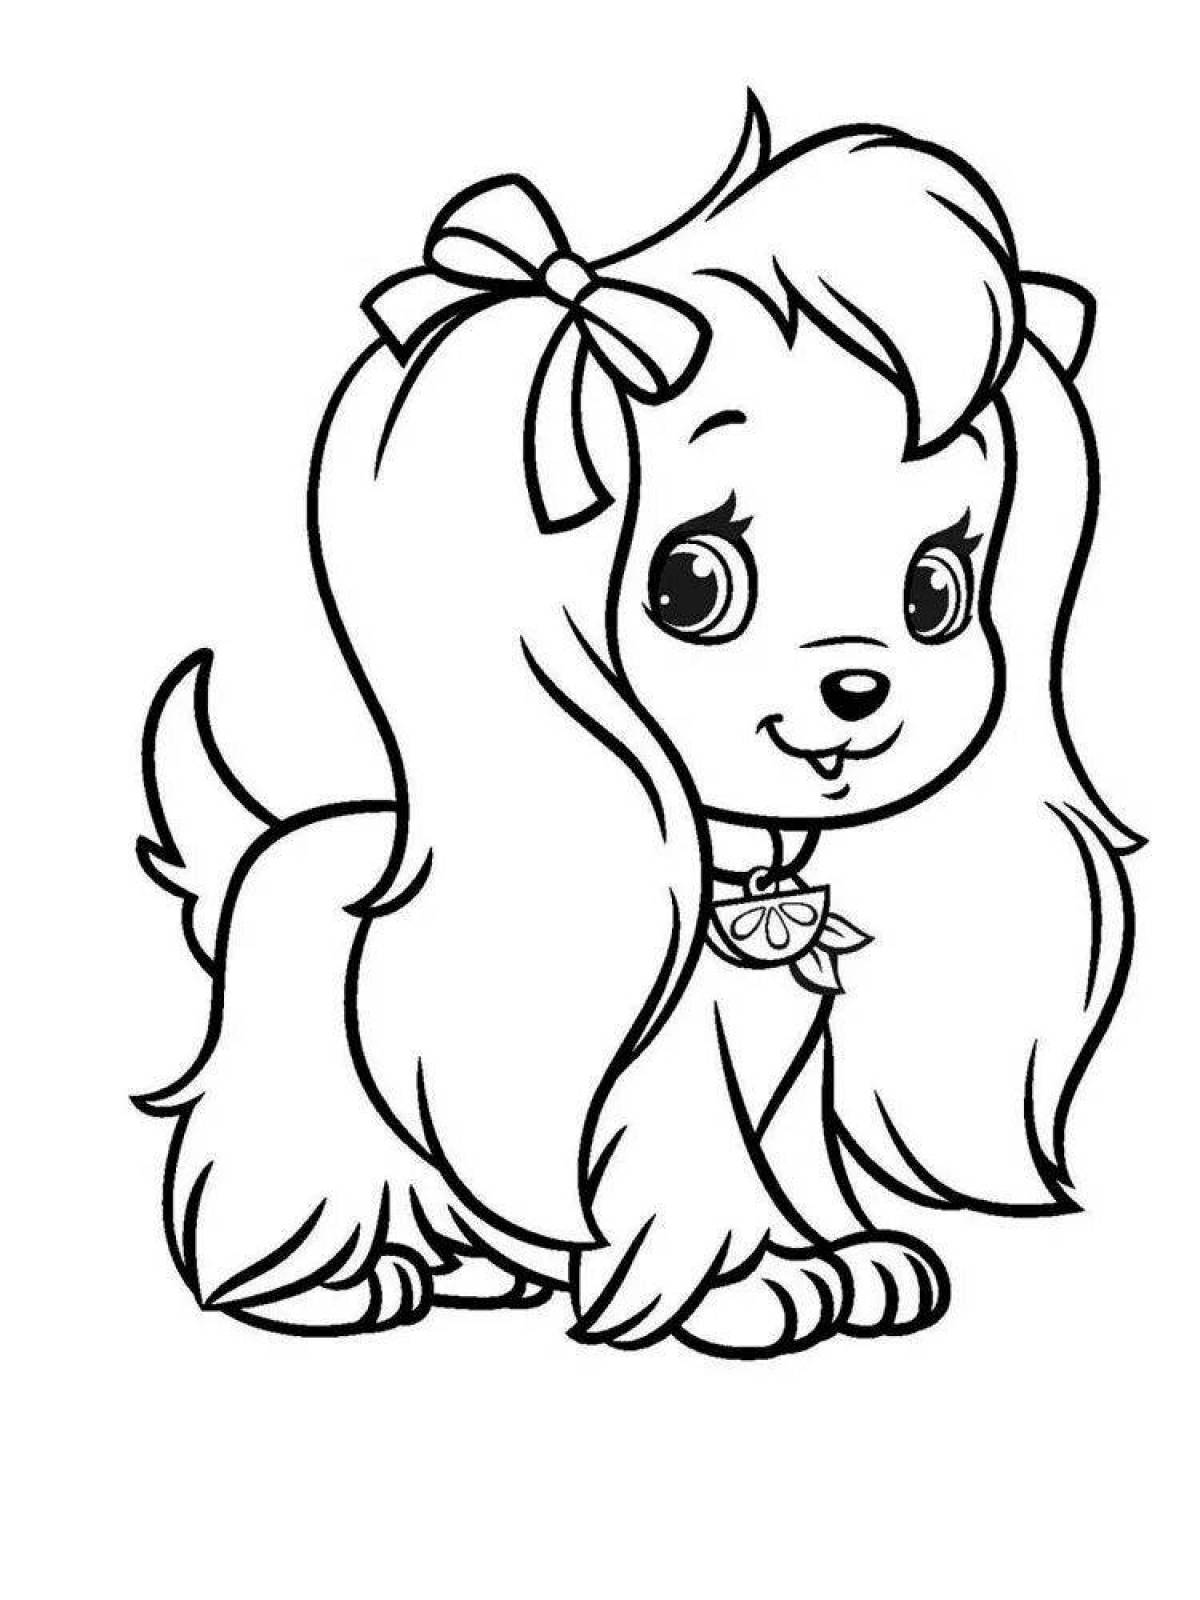 Excited dog coloring pages for kids